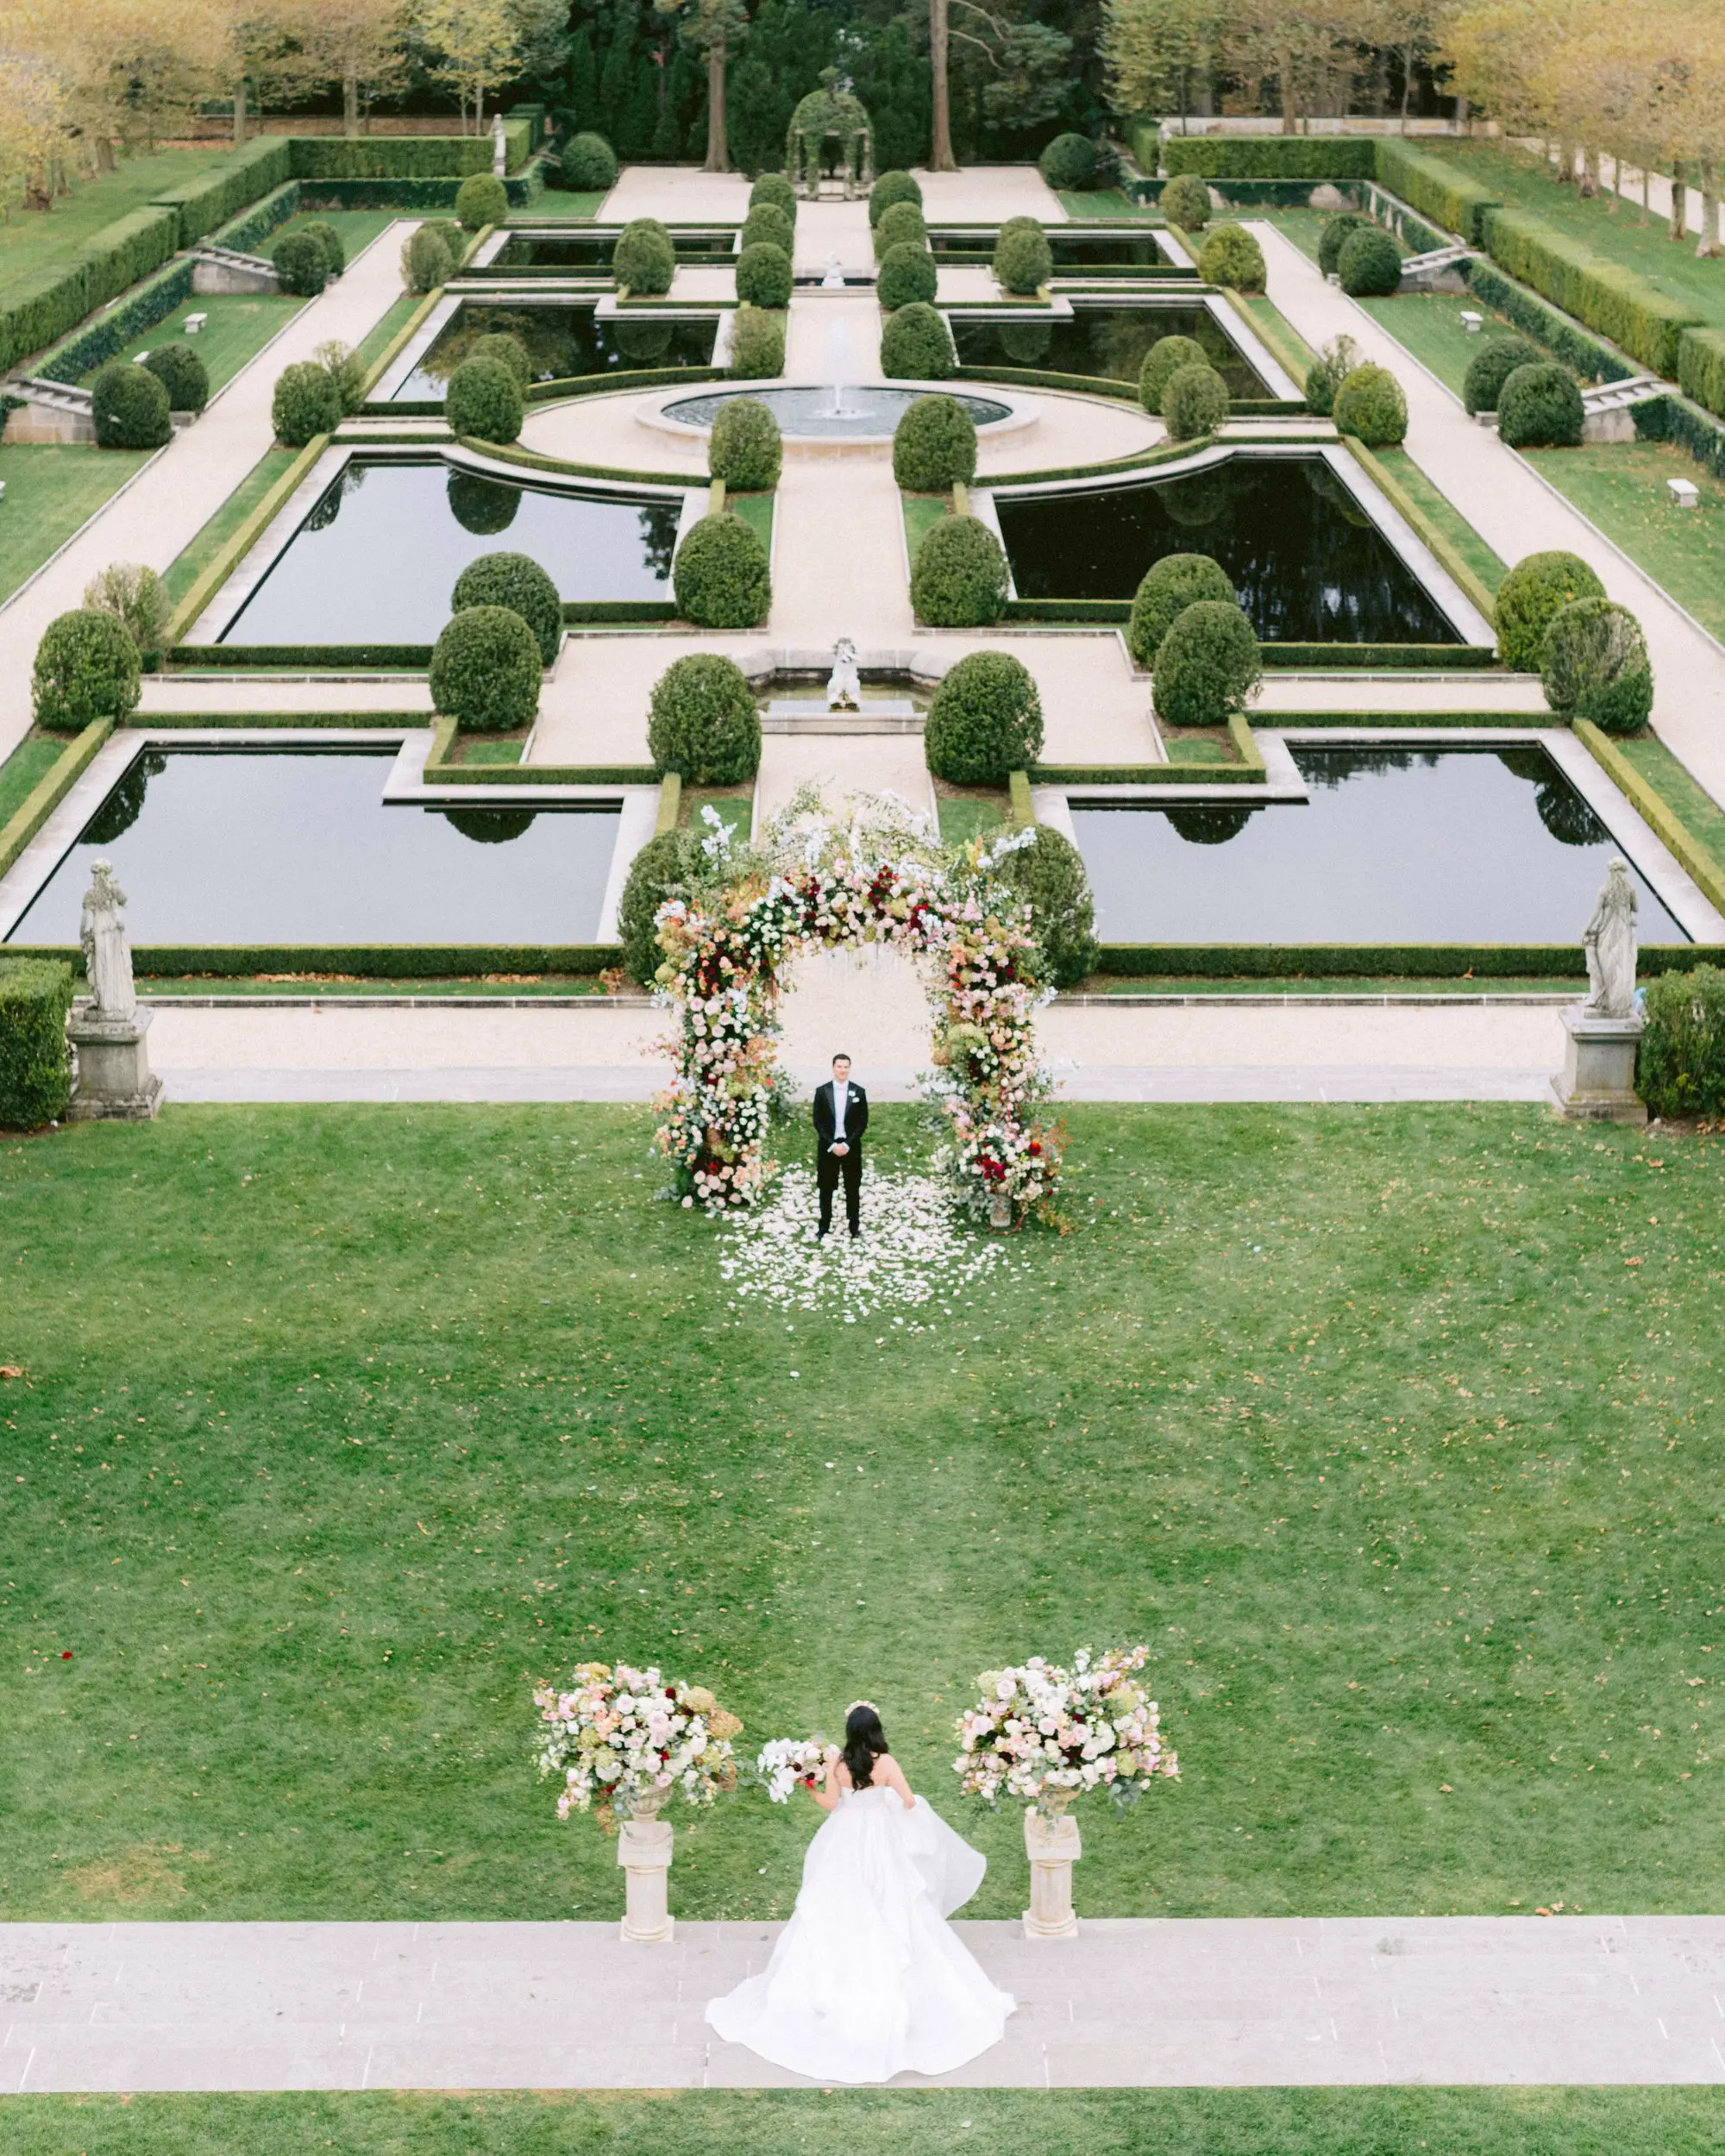 We always fall in love with a couples first look photos, especially at ...